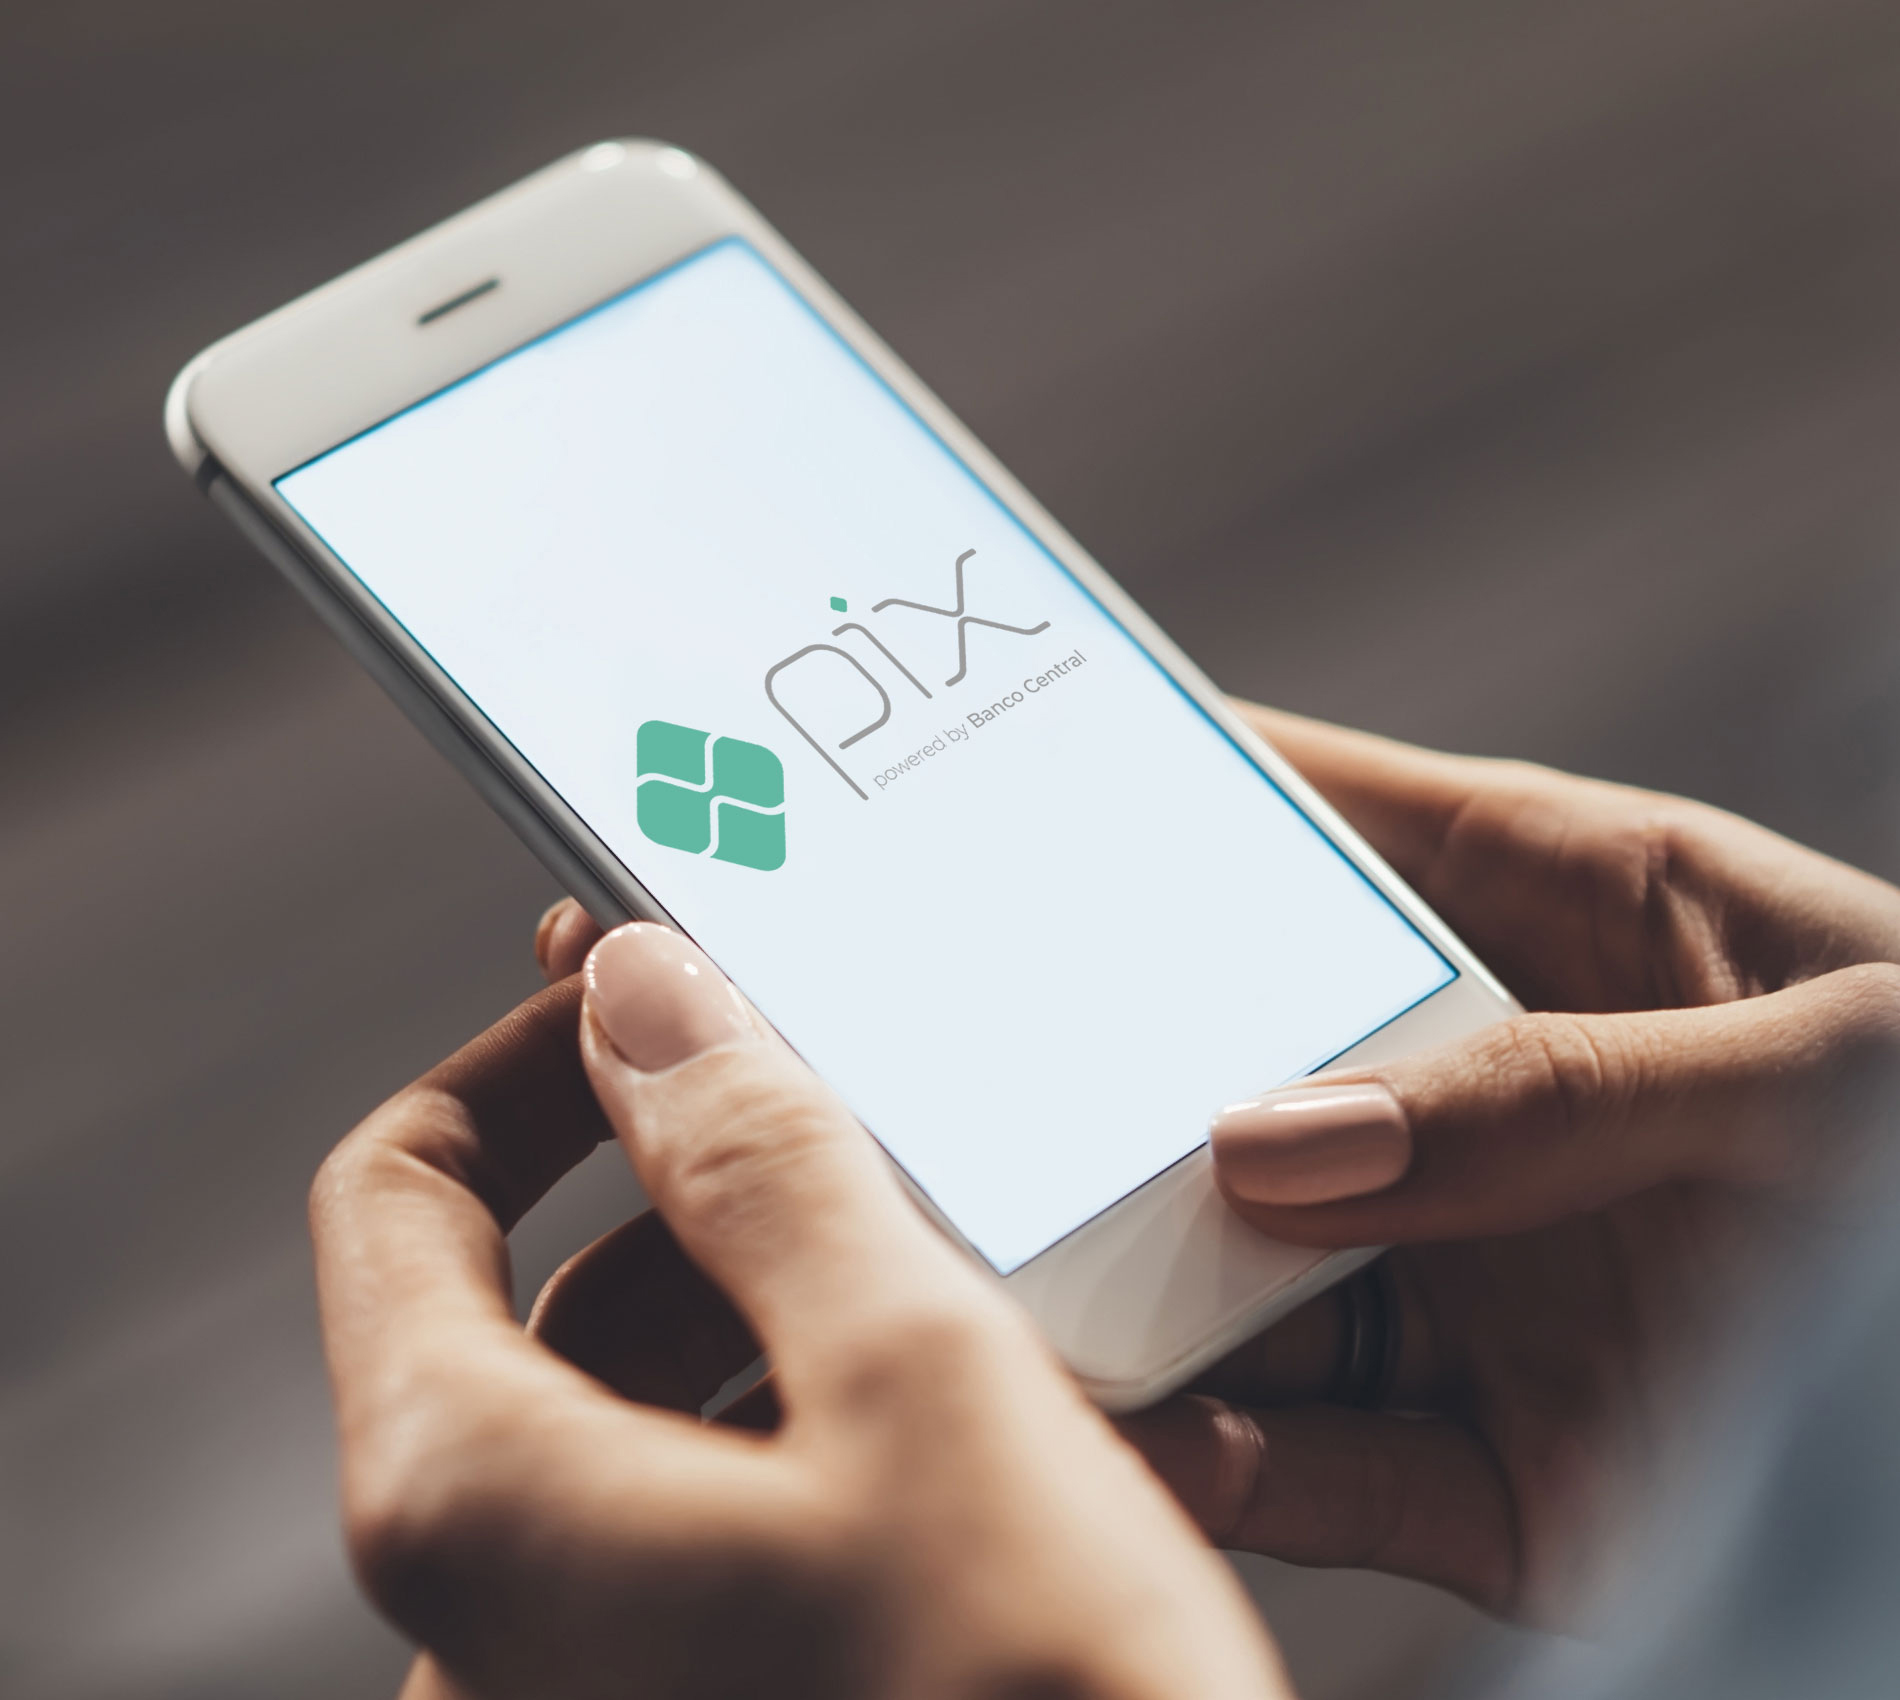 Pix will stimulate mobile payment methods